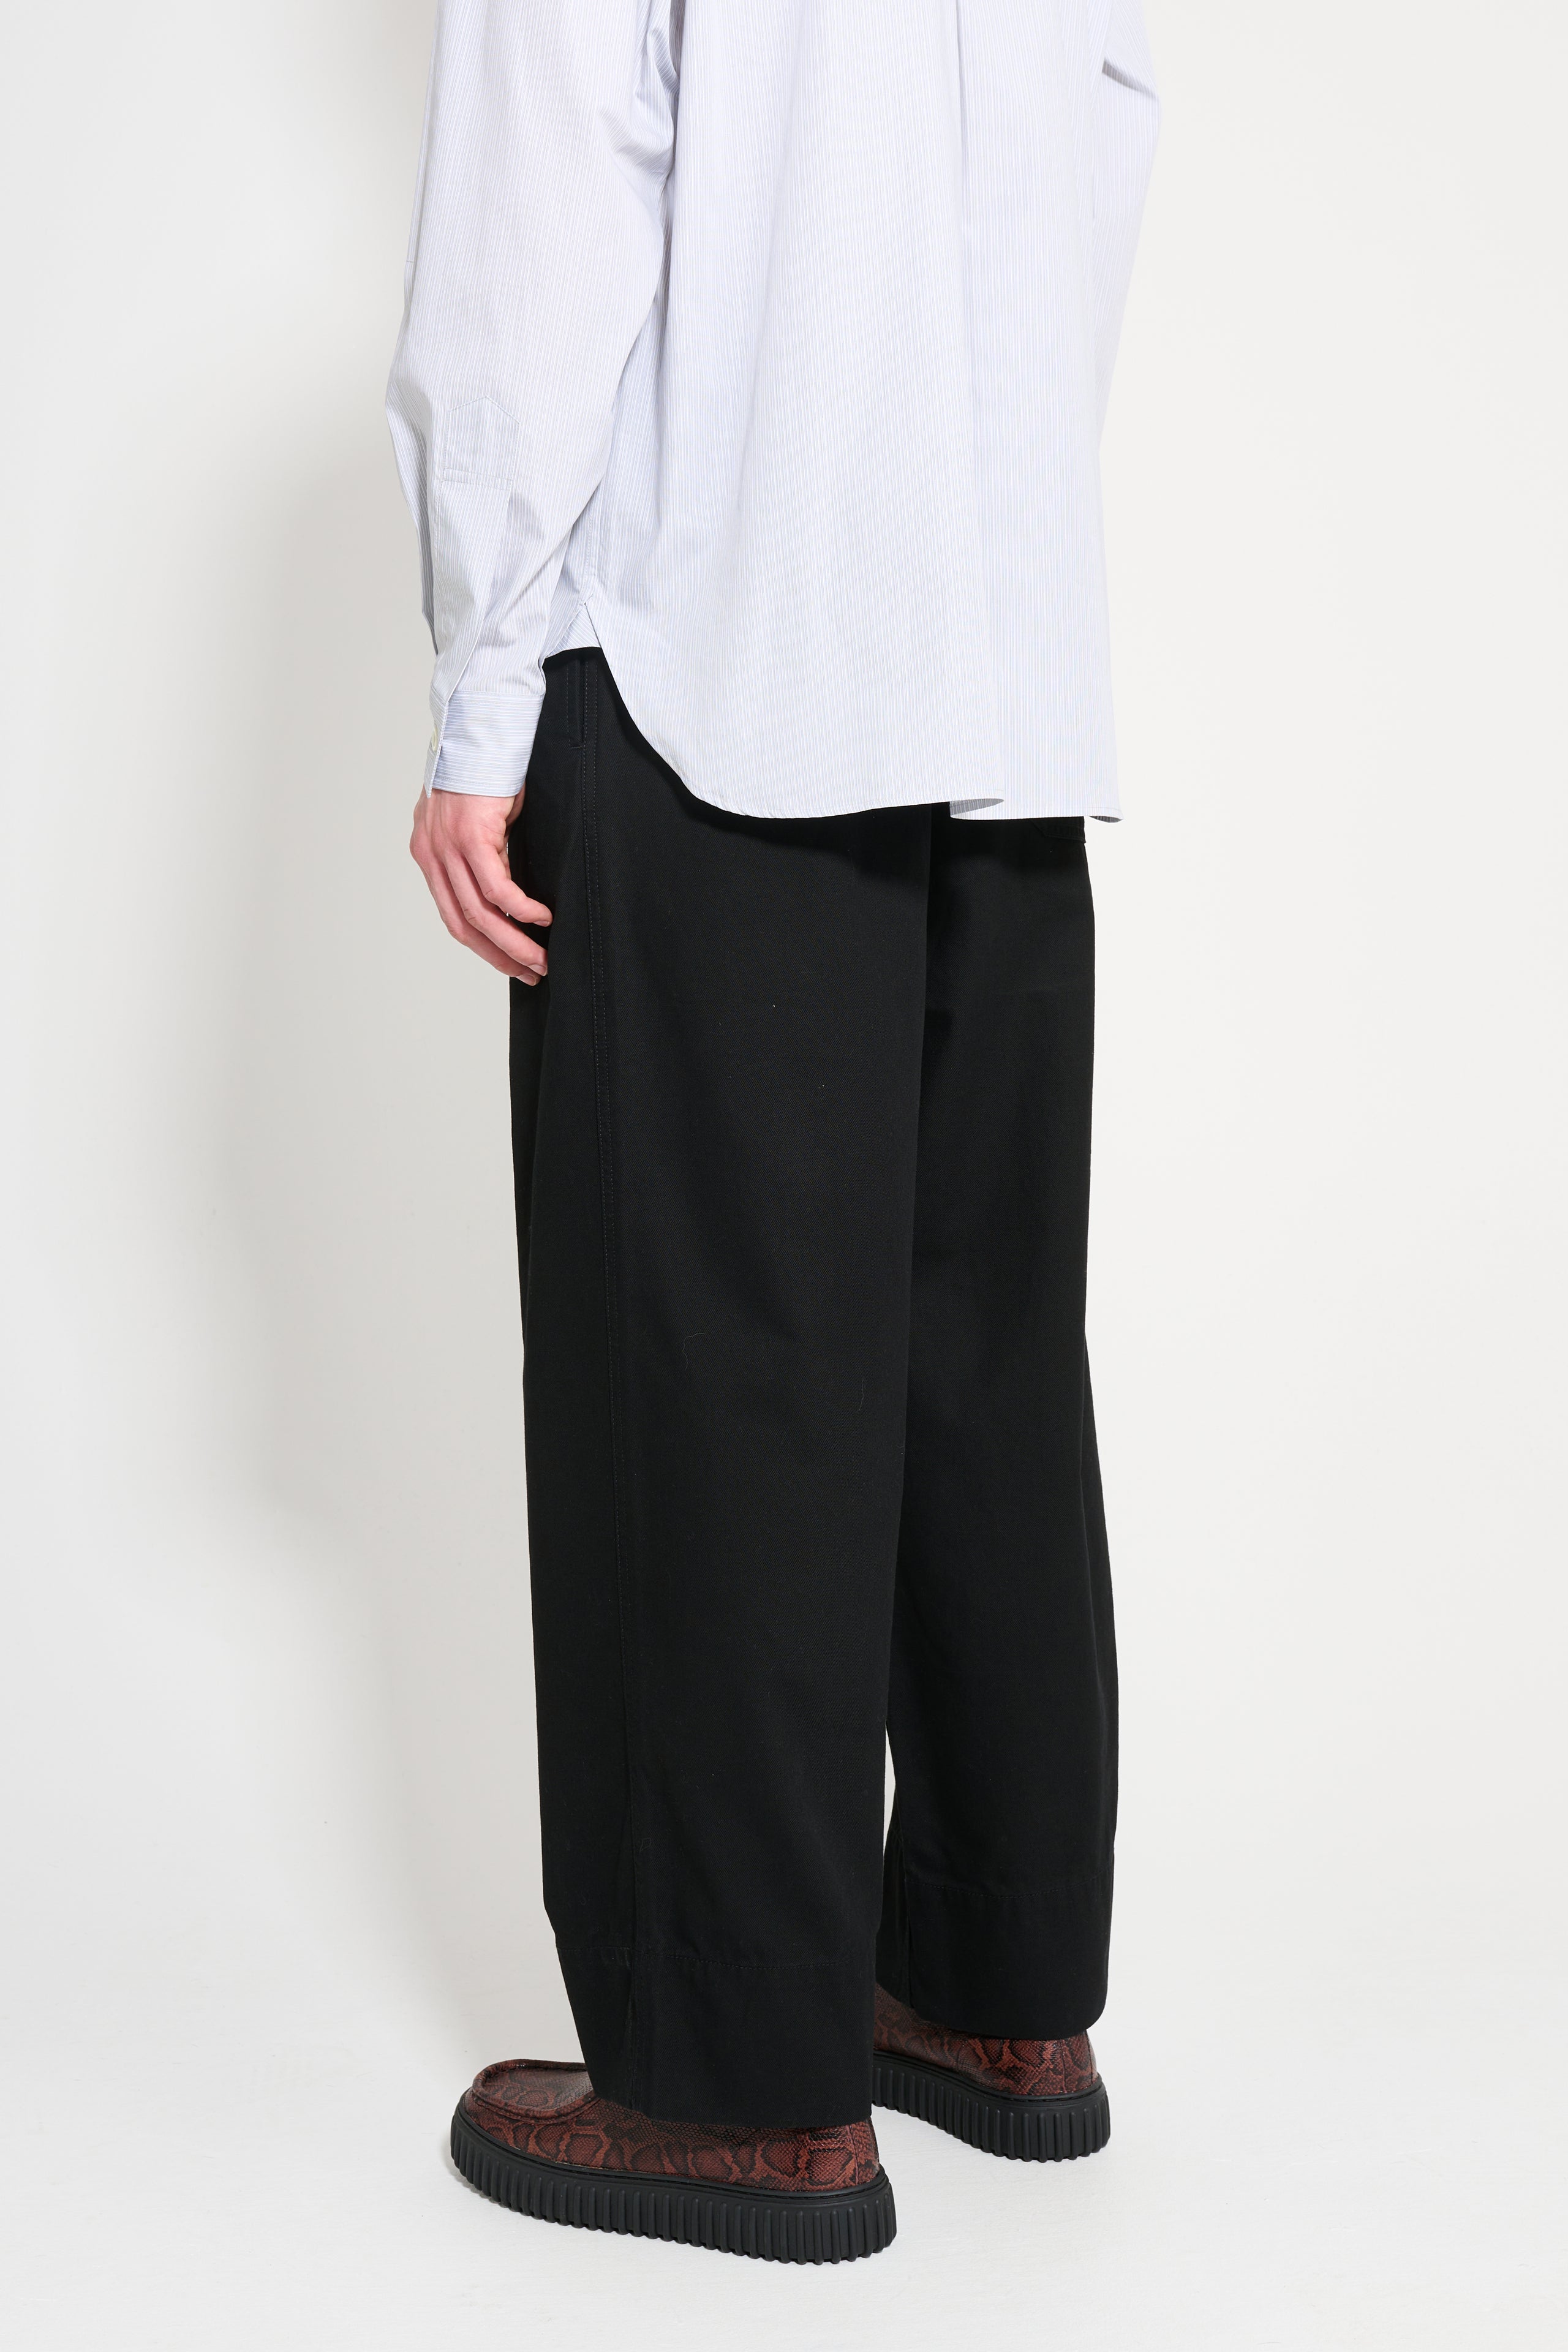 Margaret Howell MHL Painters Trousers Dry Cotton Garbadine Black